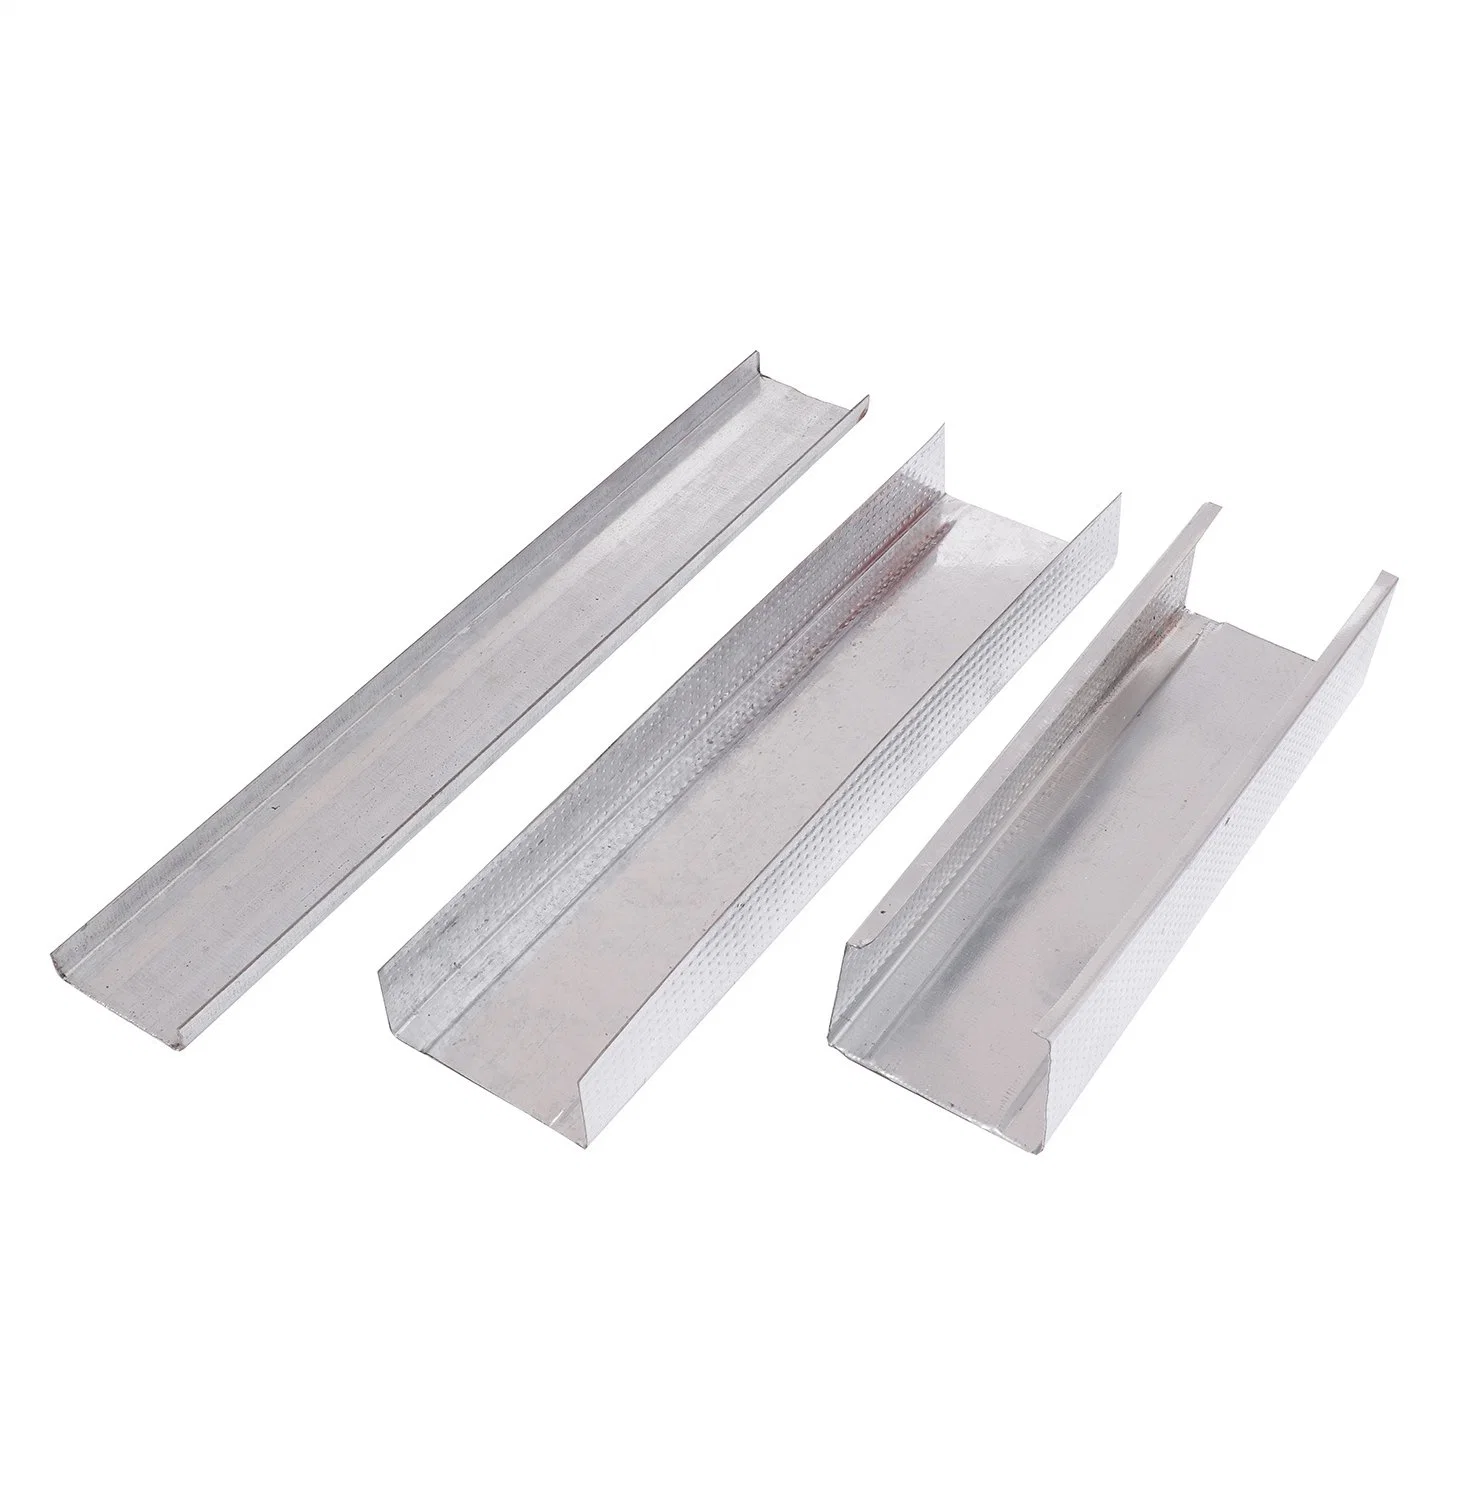 Products Light Steel Good Sale New Light Steel Structure Ready Made House Anti-Corrosion Treatment of Hot DIP Galvanized Steel